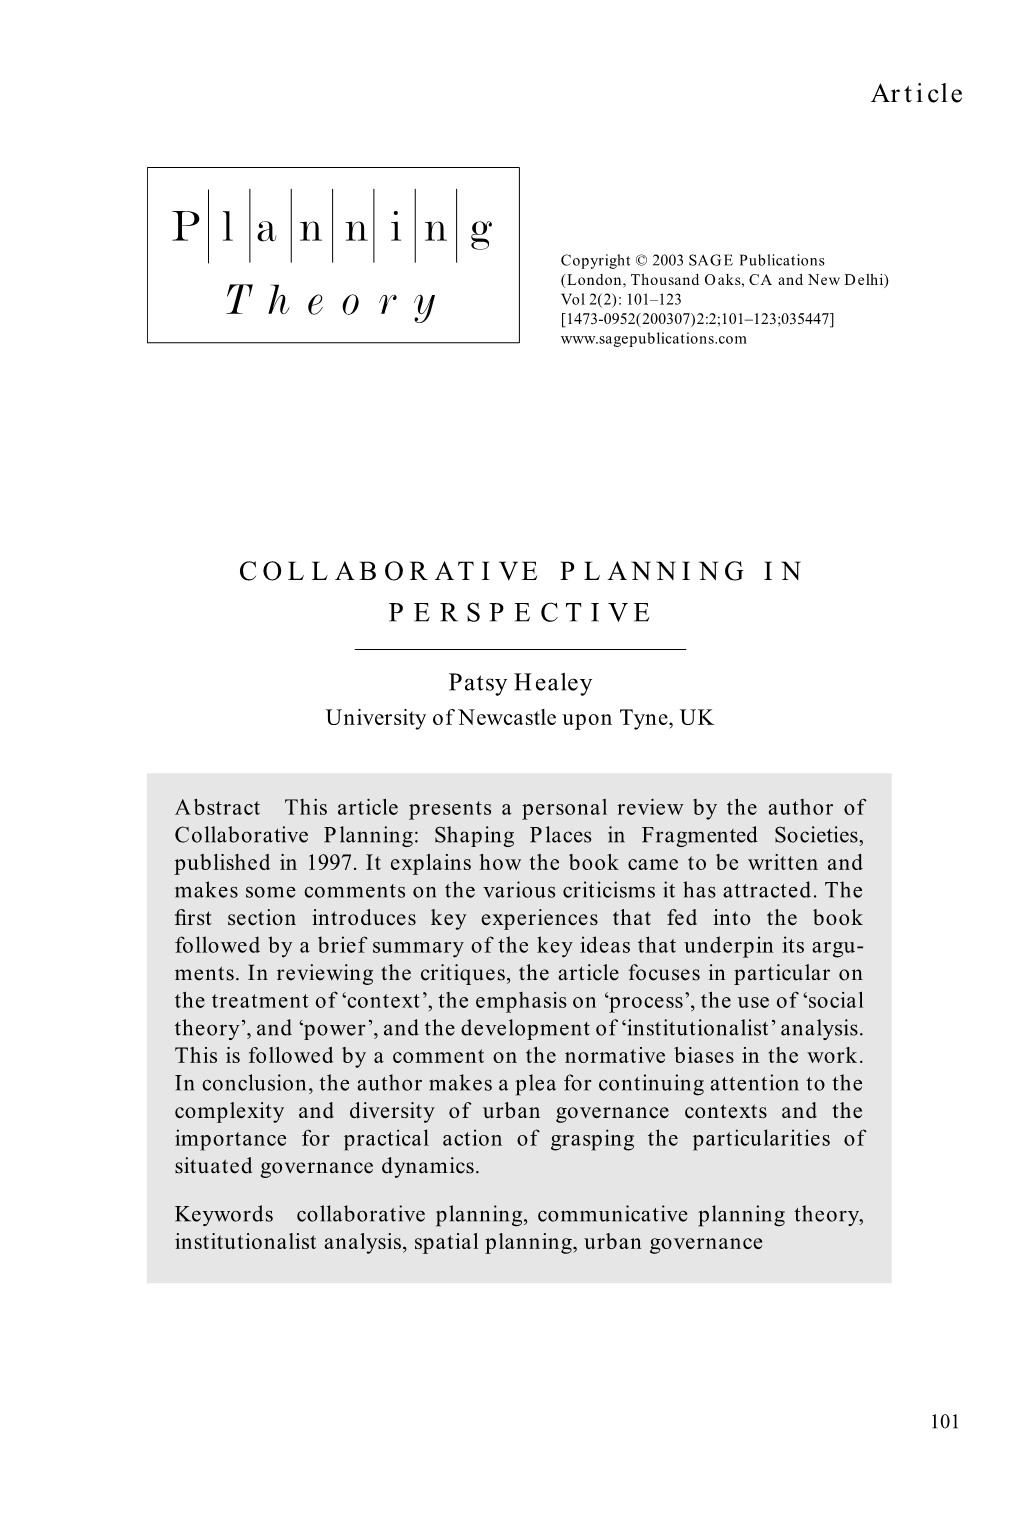 COLLABORATIVE PLANNING I N PERSPECTIVE Article